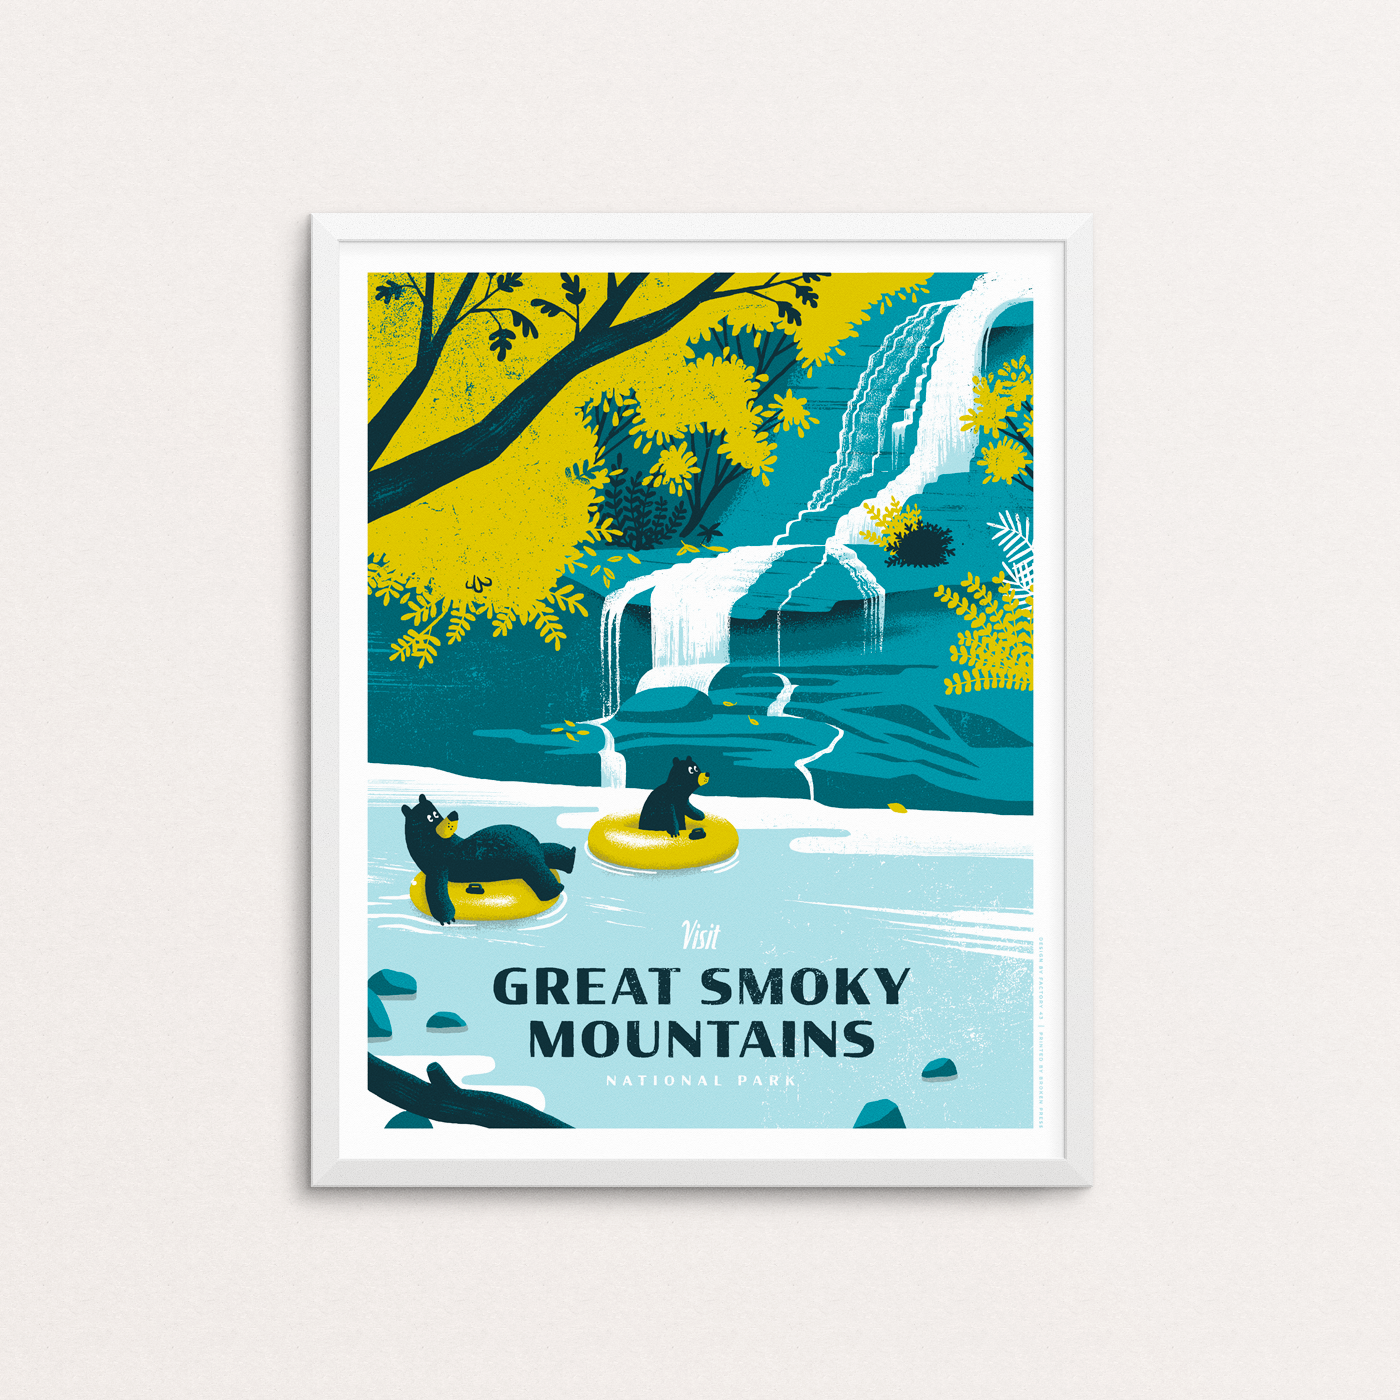 Bears enjoy the waterfalls near Deep Creek area of Great Smoky Mountains National Park, which park overlaps North Carolina and Tennessee. Poster is shown in a white frame.